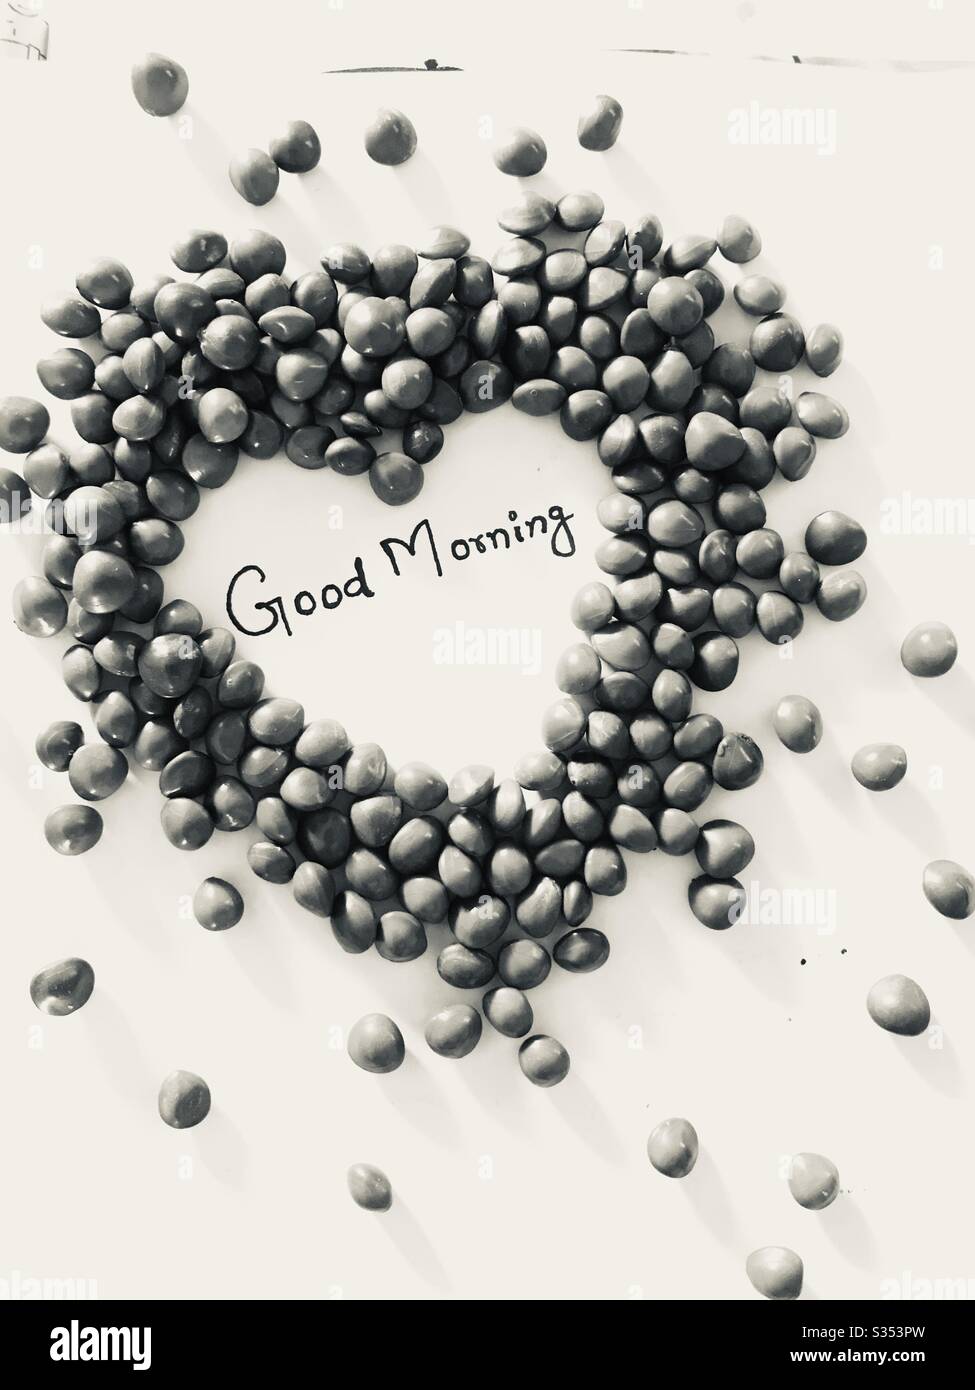 Adenanthera red beads in shape of heart with words Good Morning hand written, with white surface background. Morning message for friends,Manjadikuru in malayalam,black & white mode Stock Photo